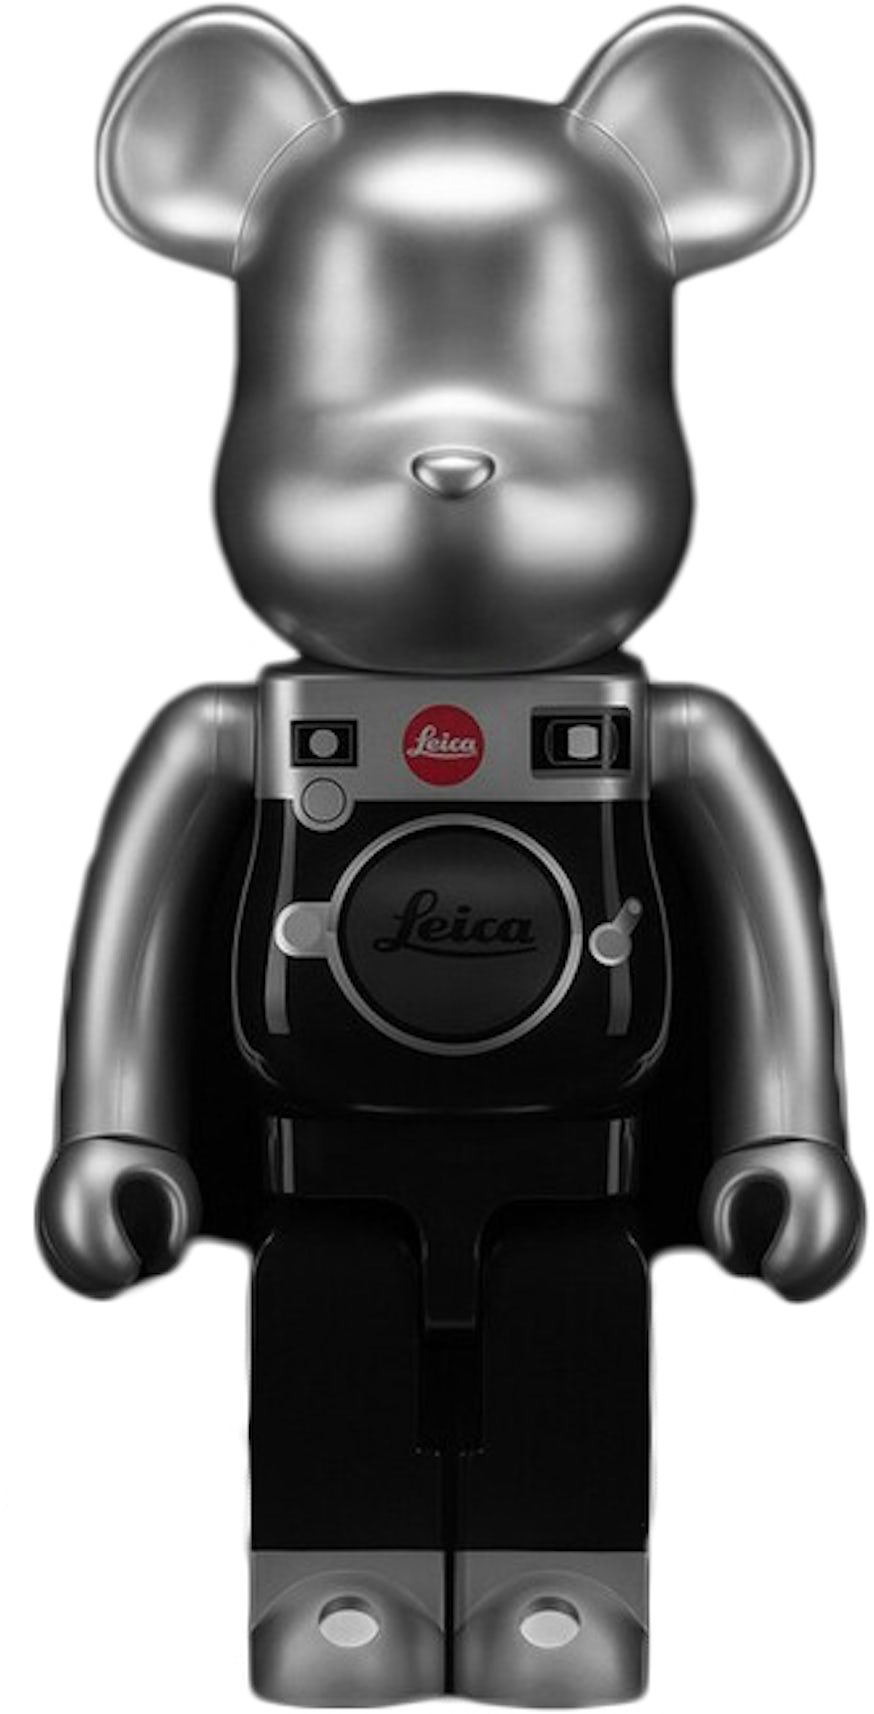 The Buyer's Guide: Bearbrick - StockX News